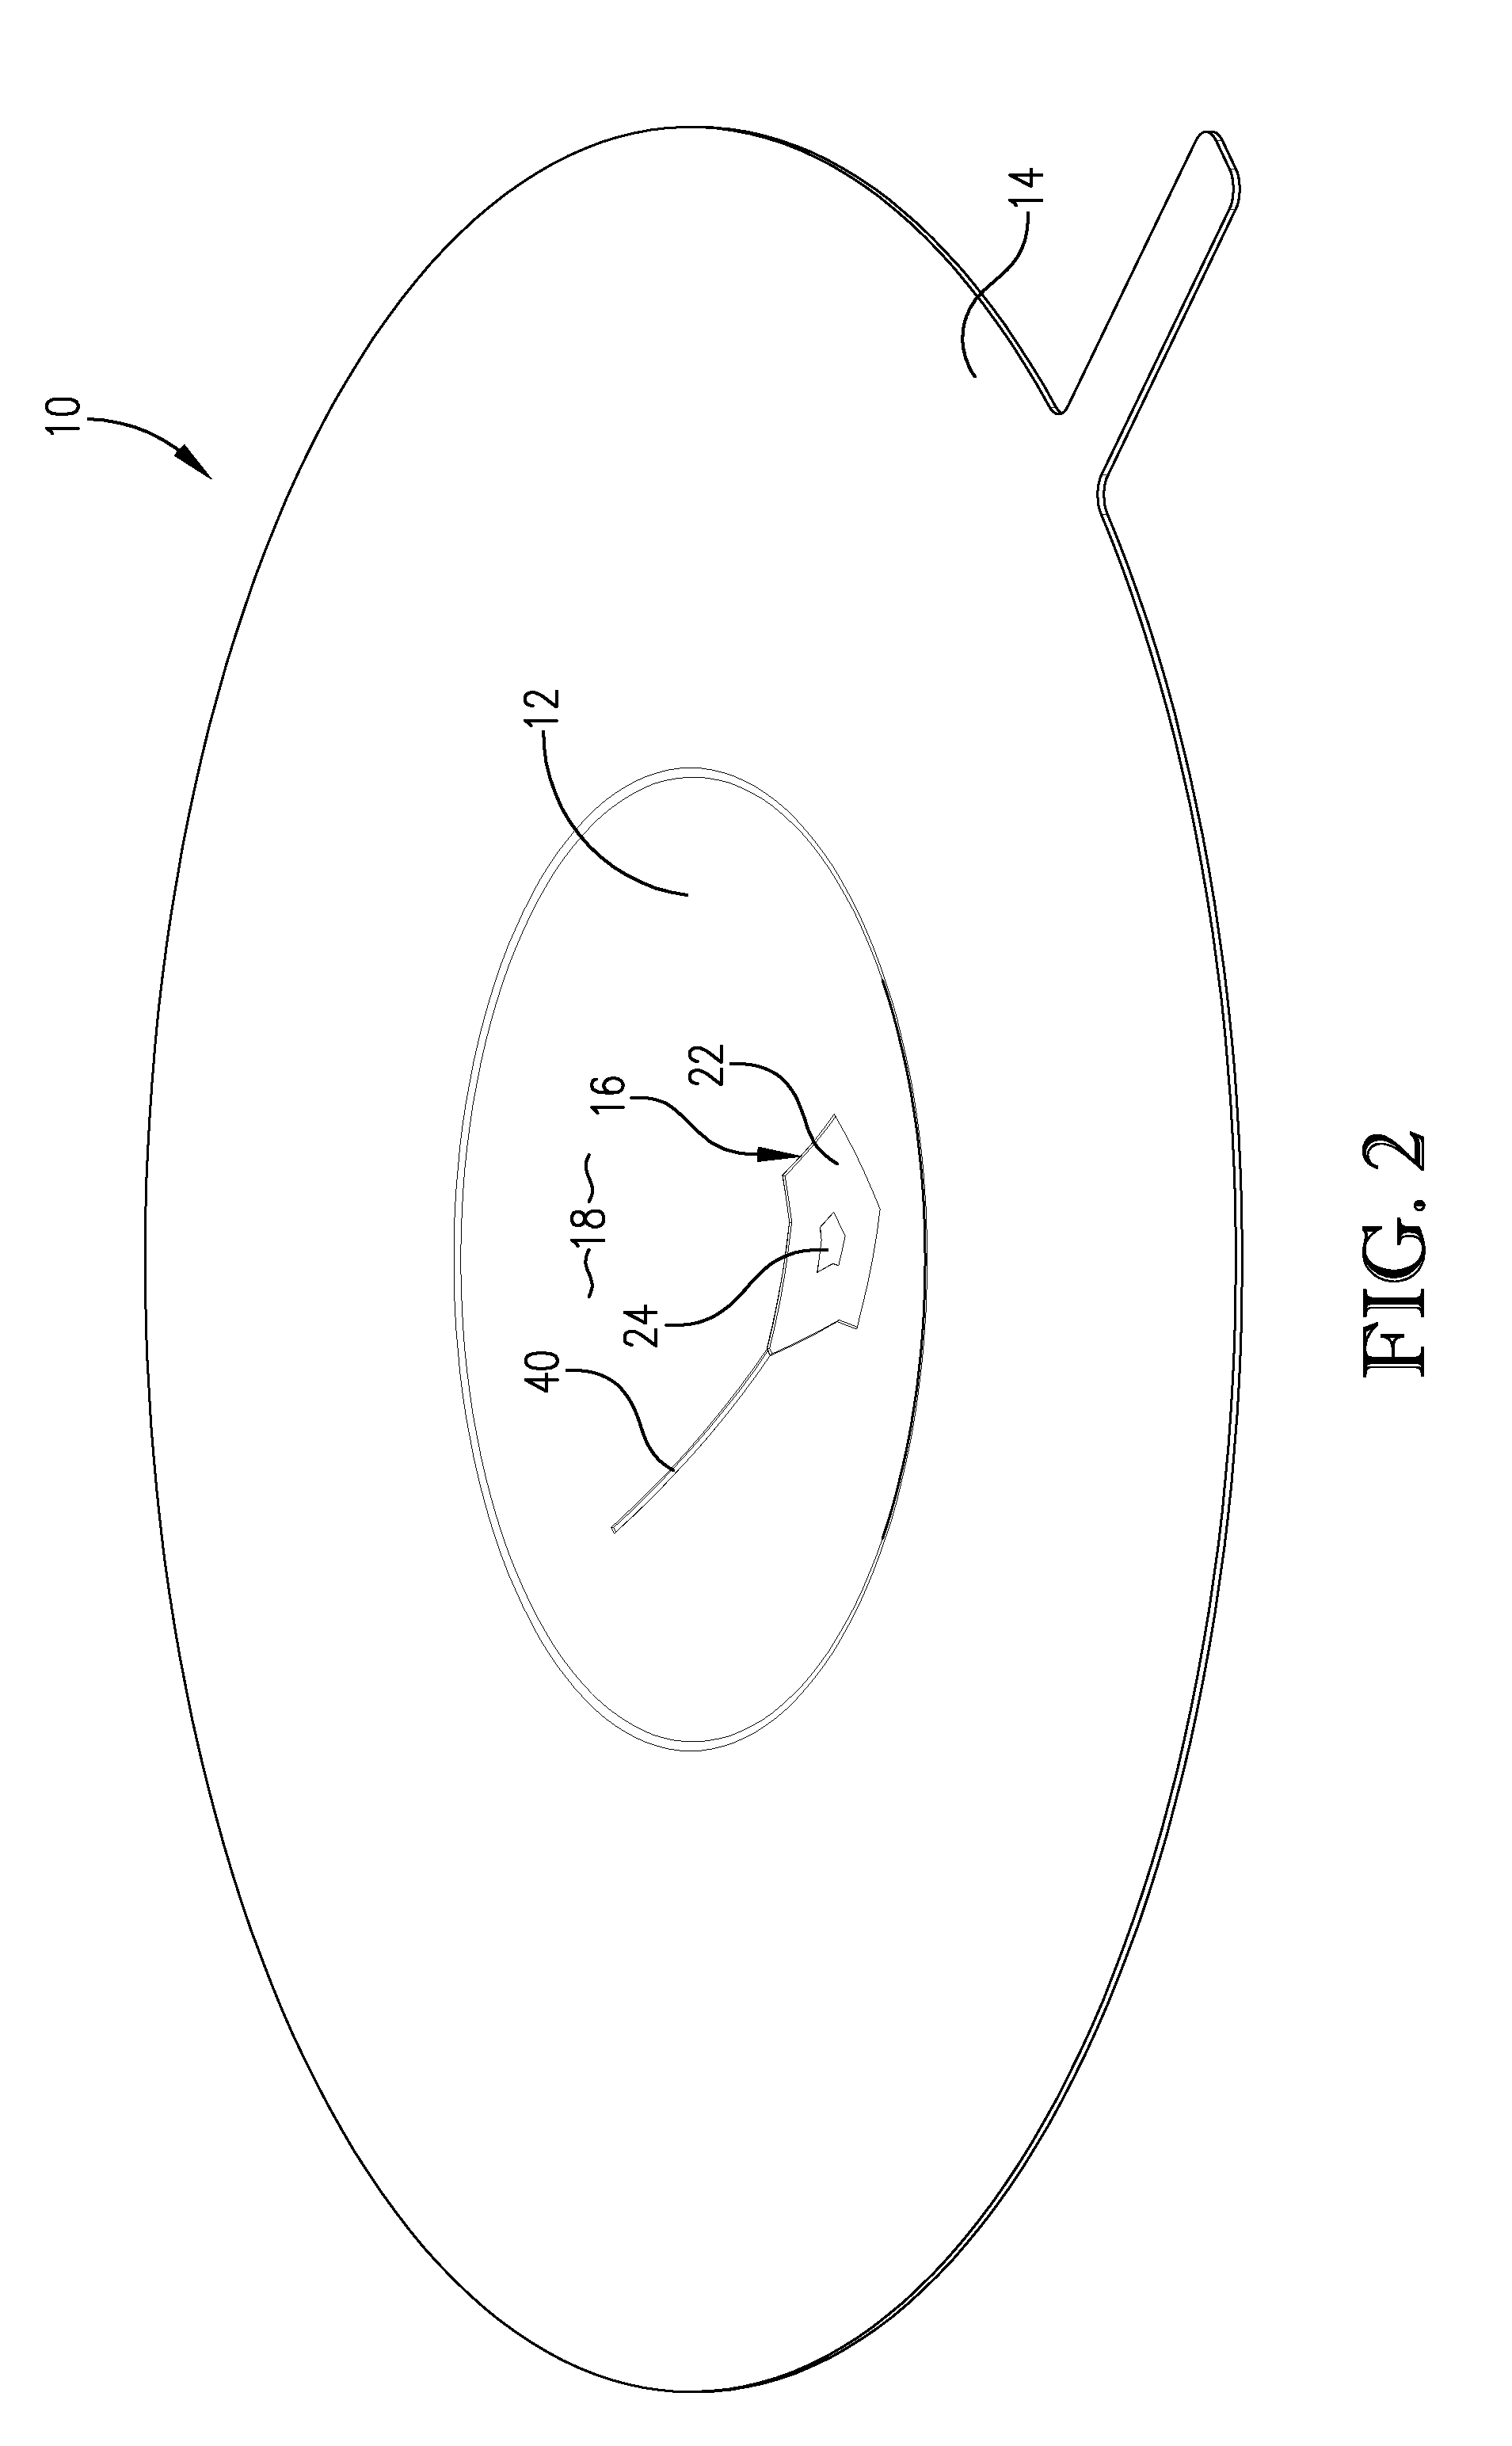 Rupture disc having laser-defined reversal initiation and deformation control features